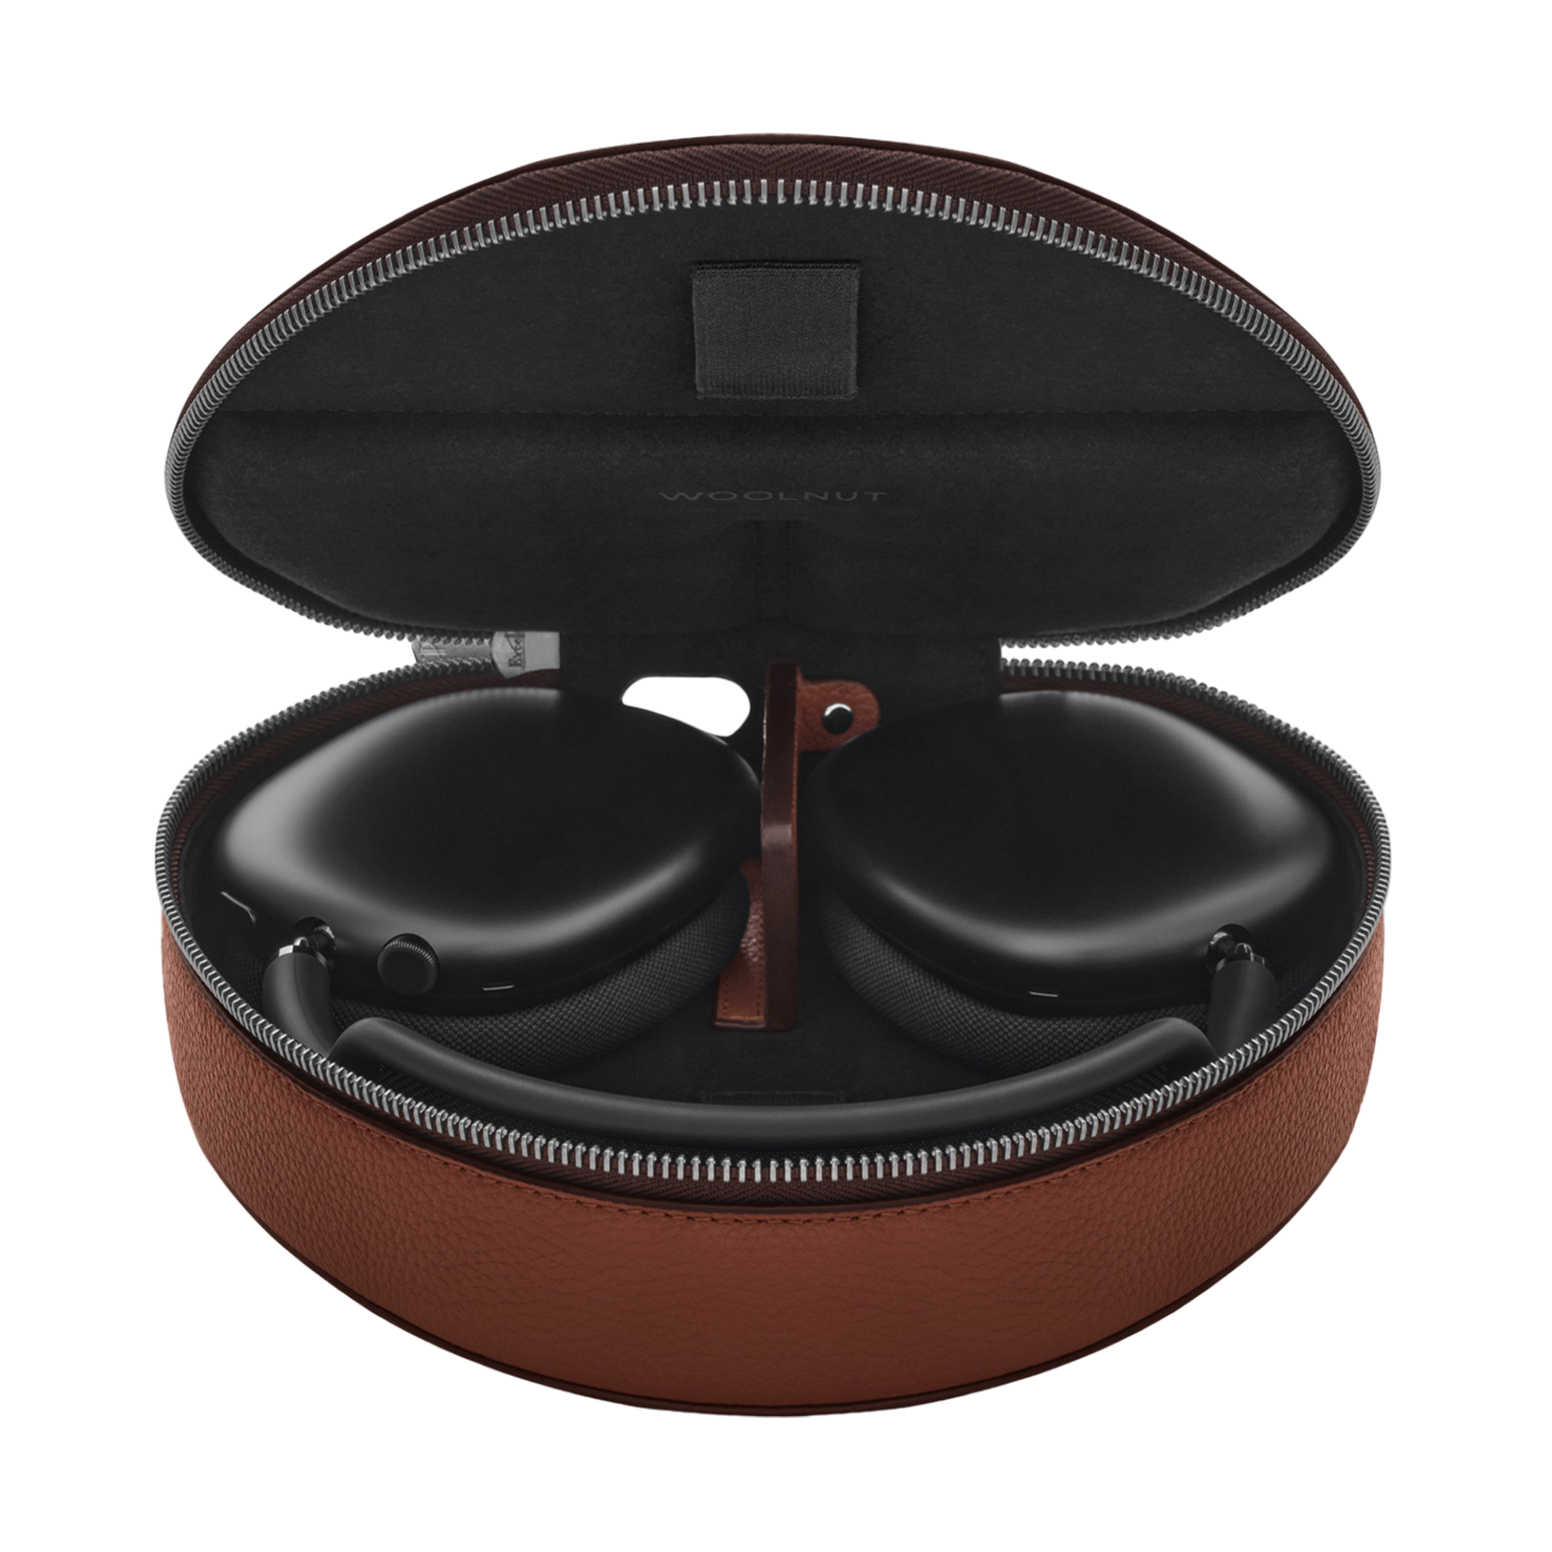 WOOLNUT Leather Case for AirPods Max - Cognac